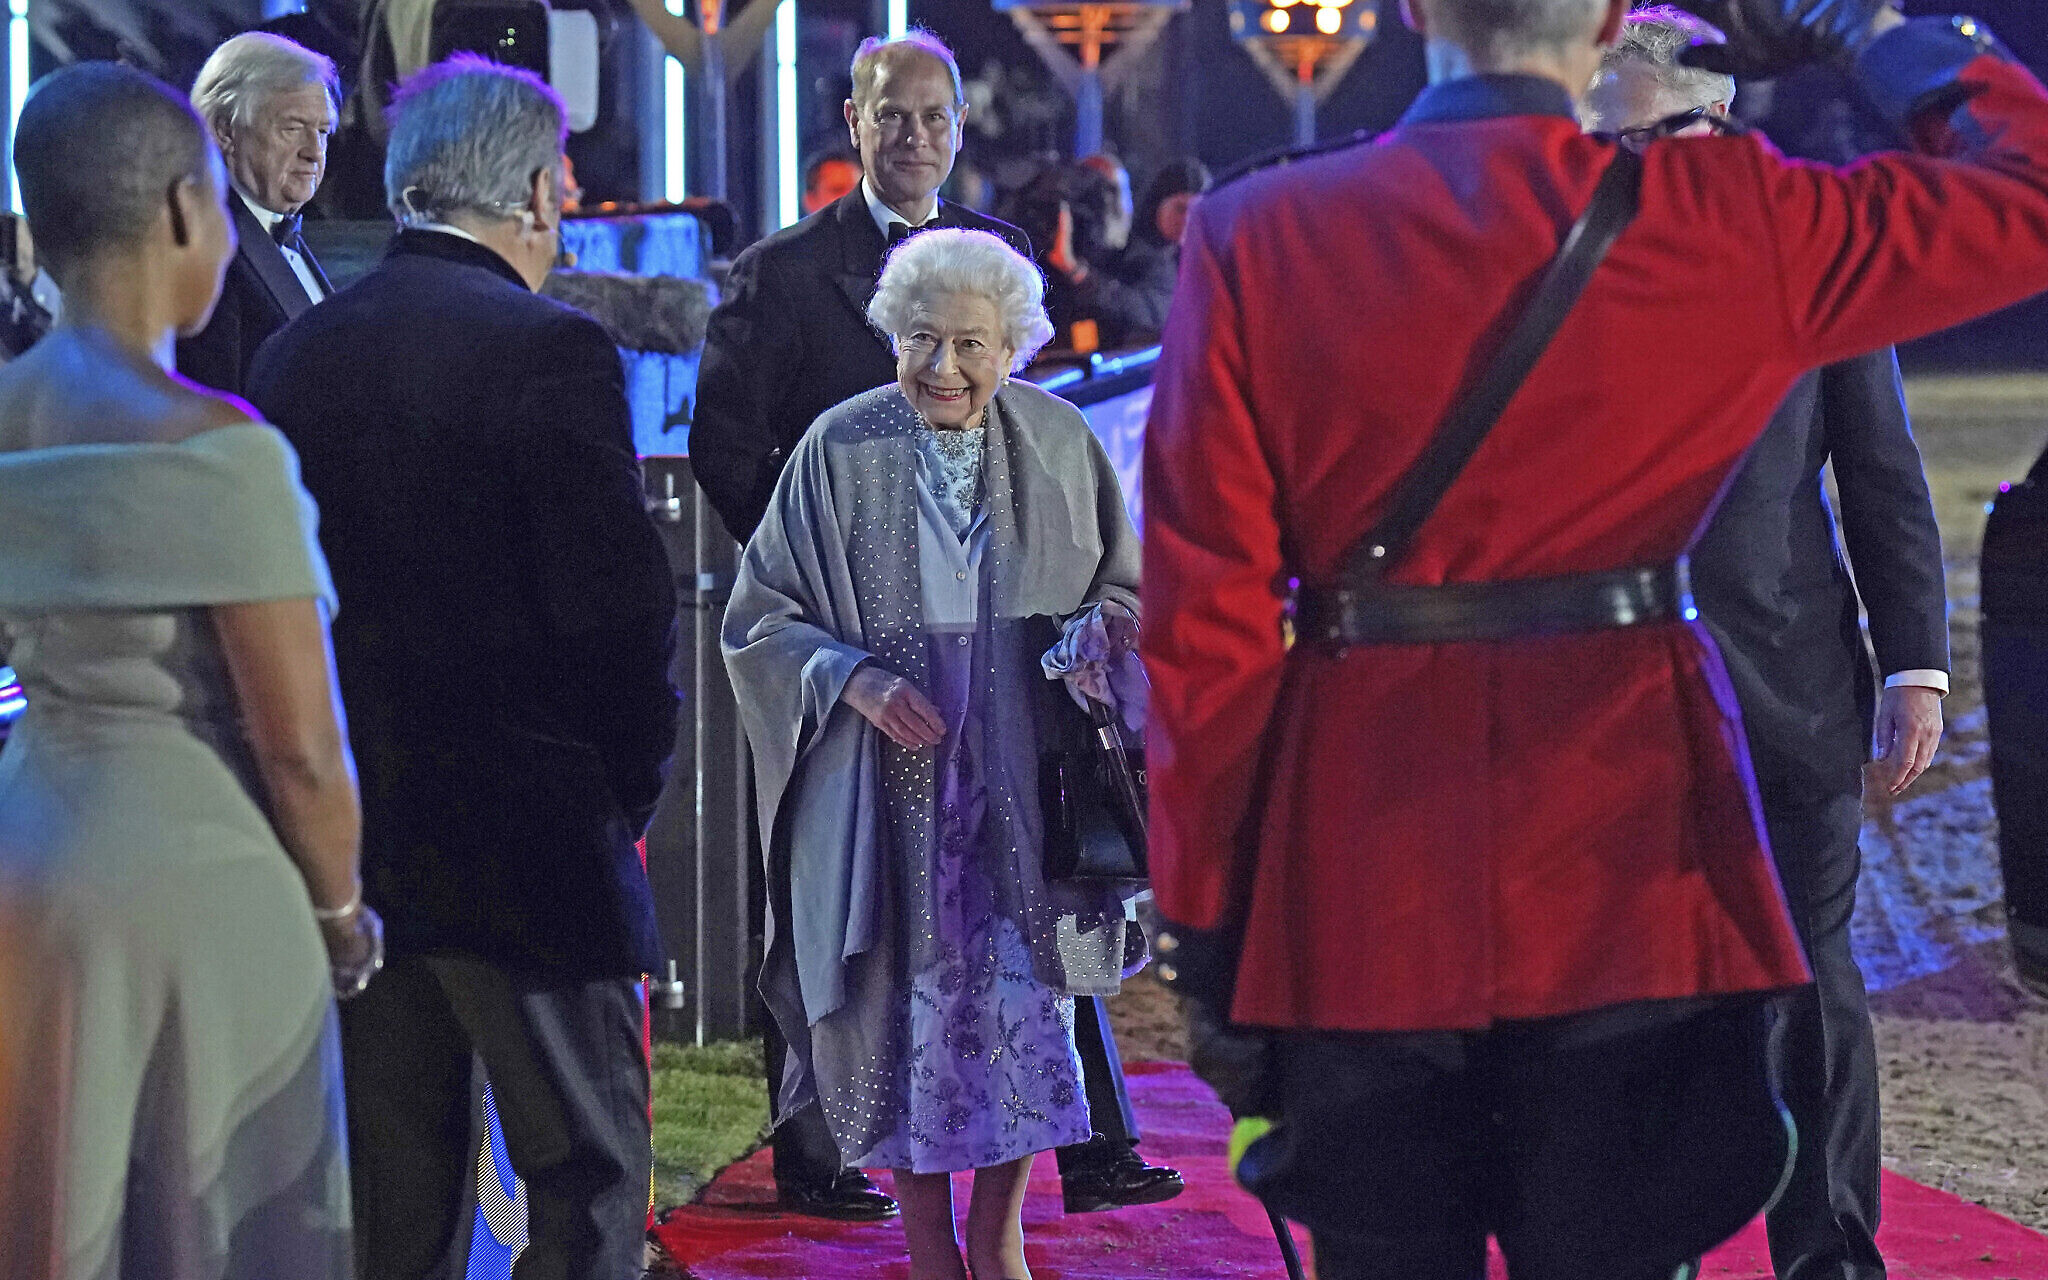 What to expect from Queen Elizabeth's Jubilee year